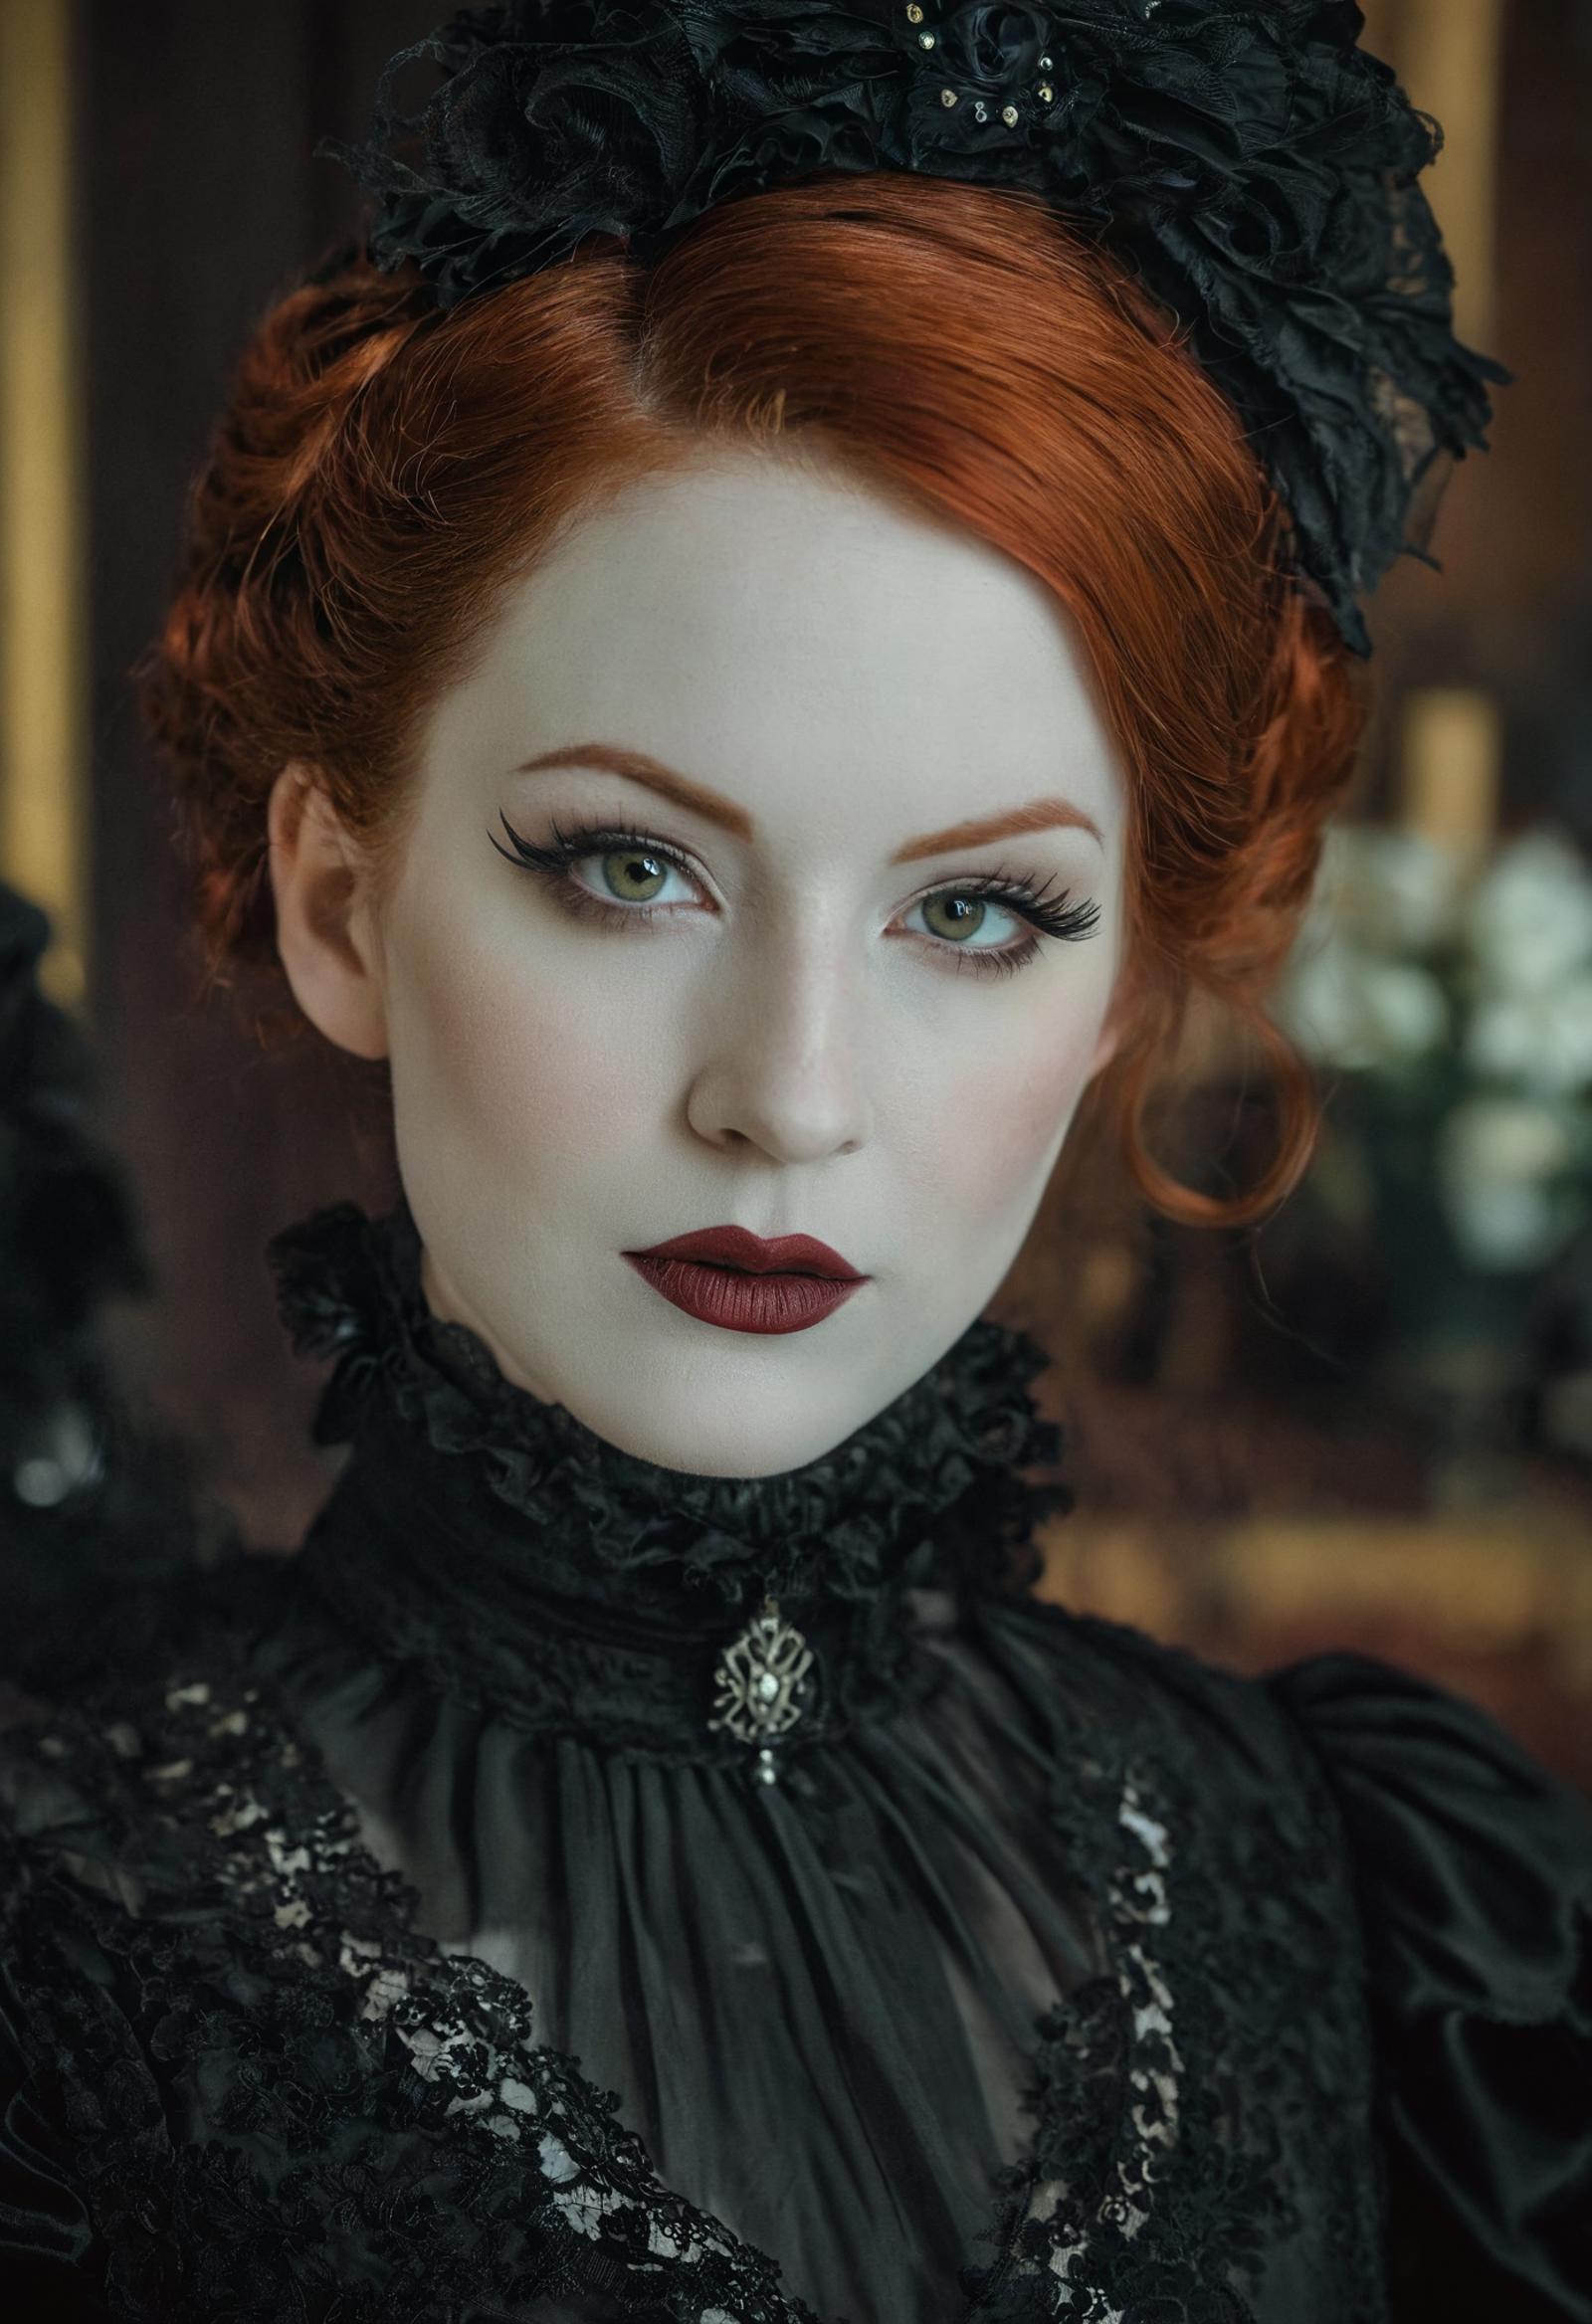 A young woman with red hair and green eyes wearing a black dress and a black hat.